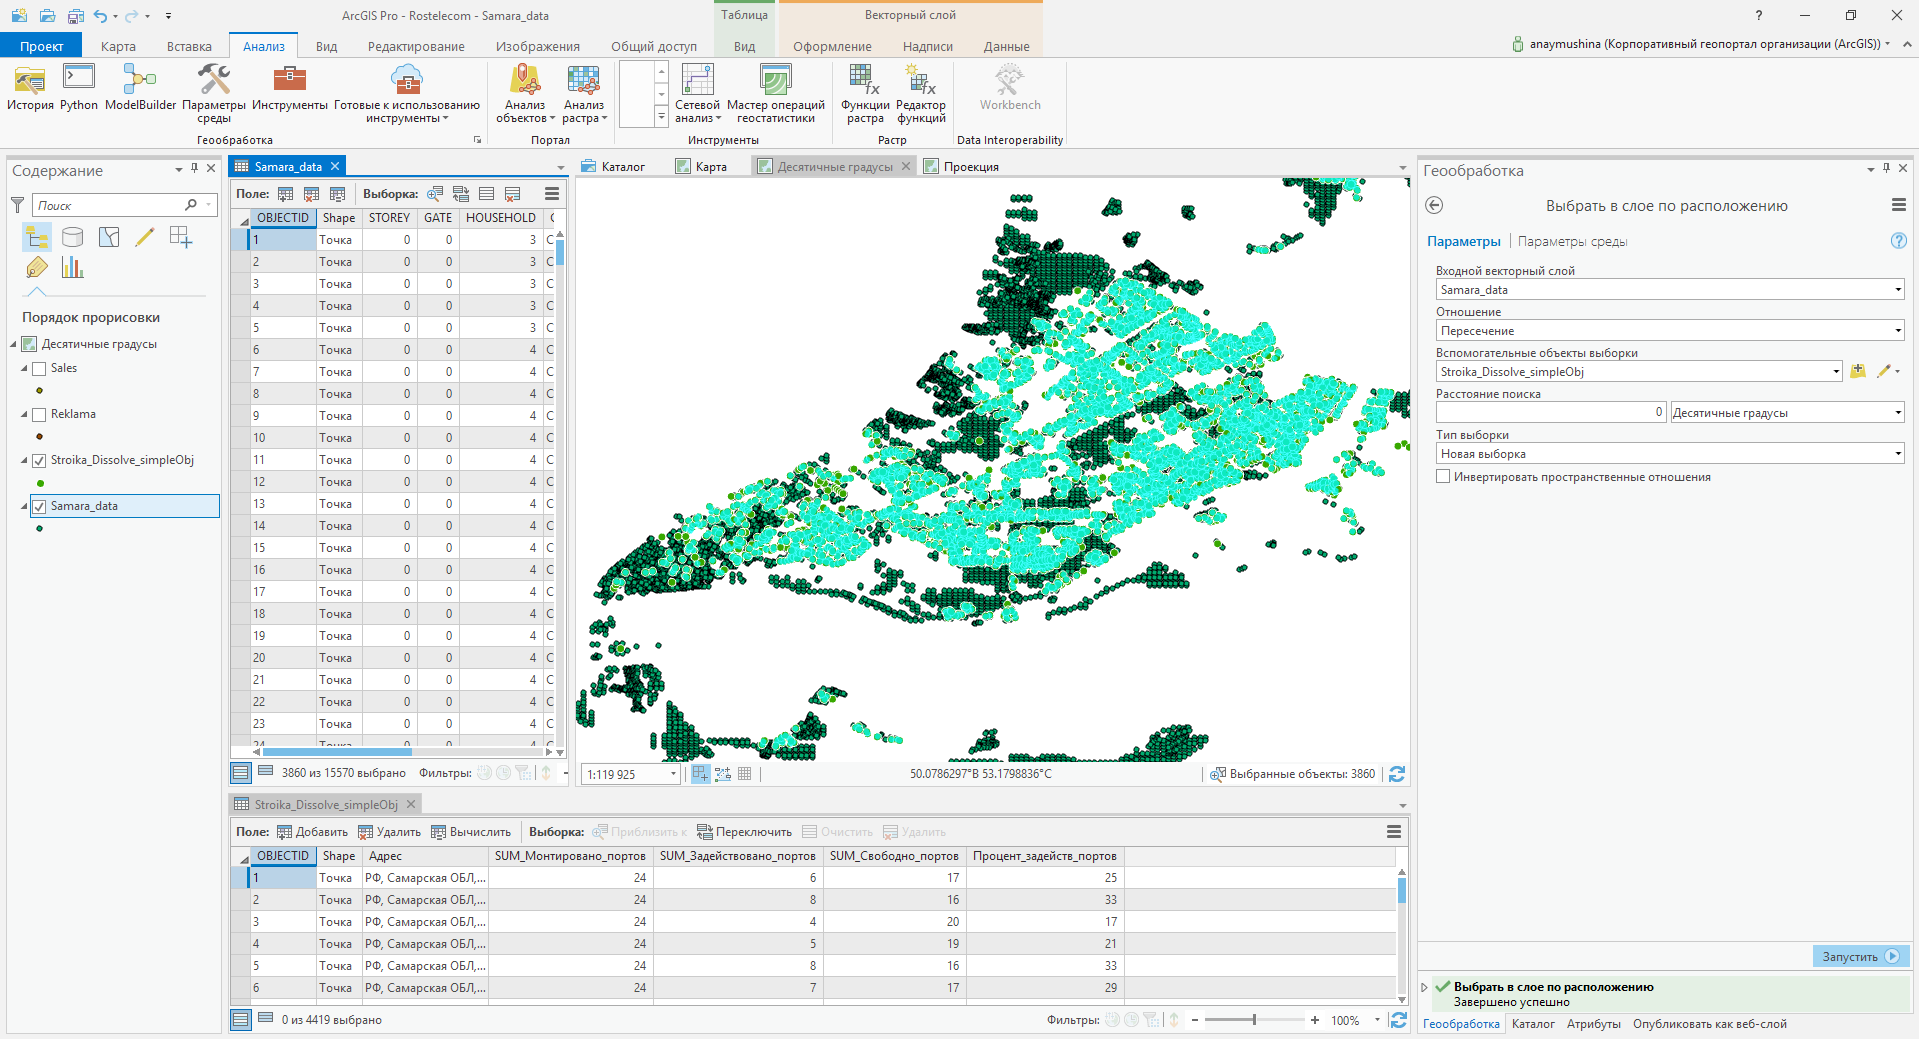 Results of Select by location in ArcGIS Pro.